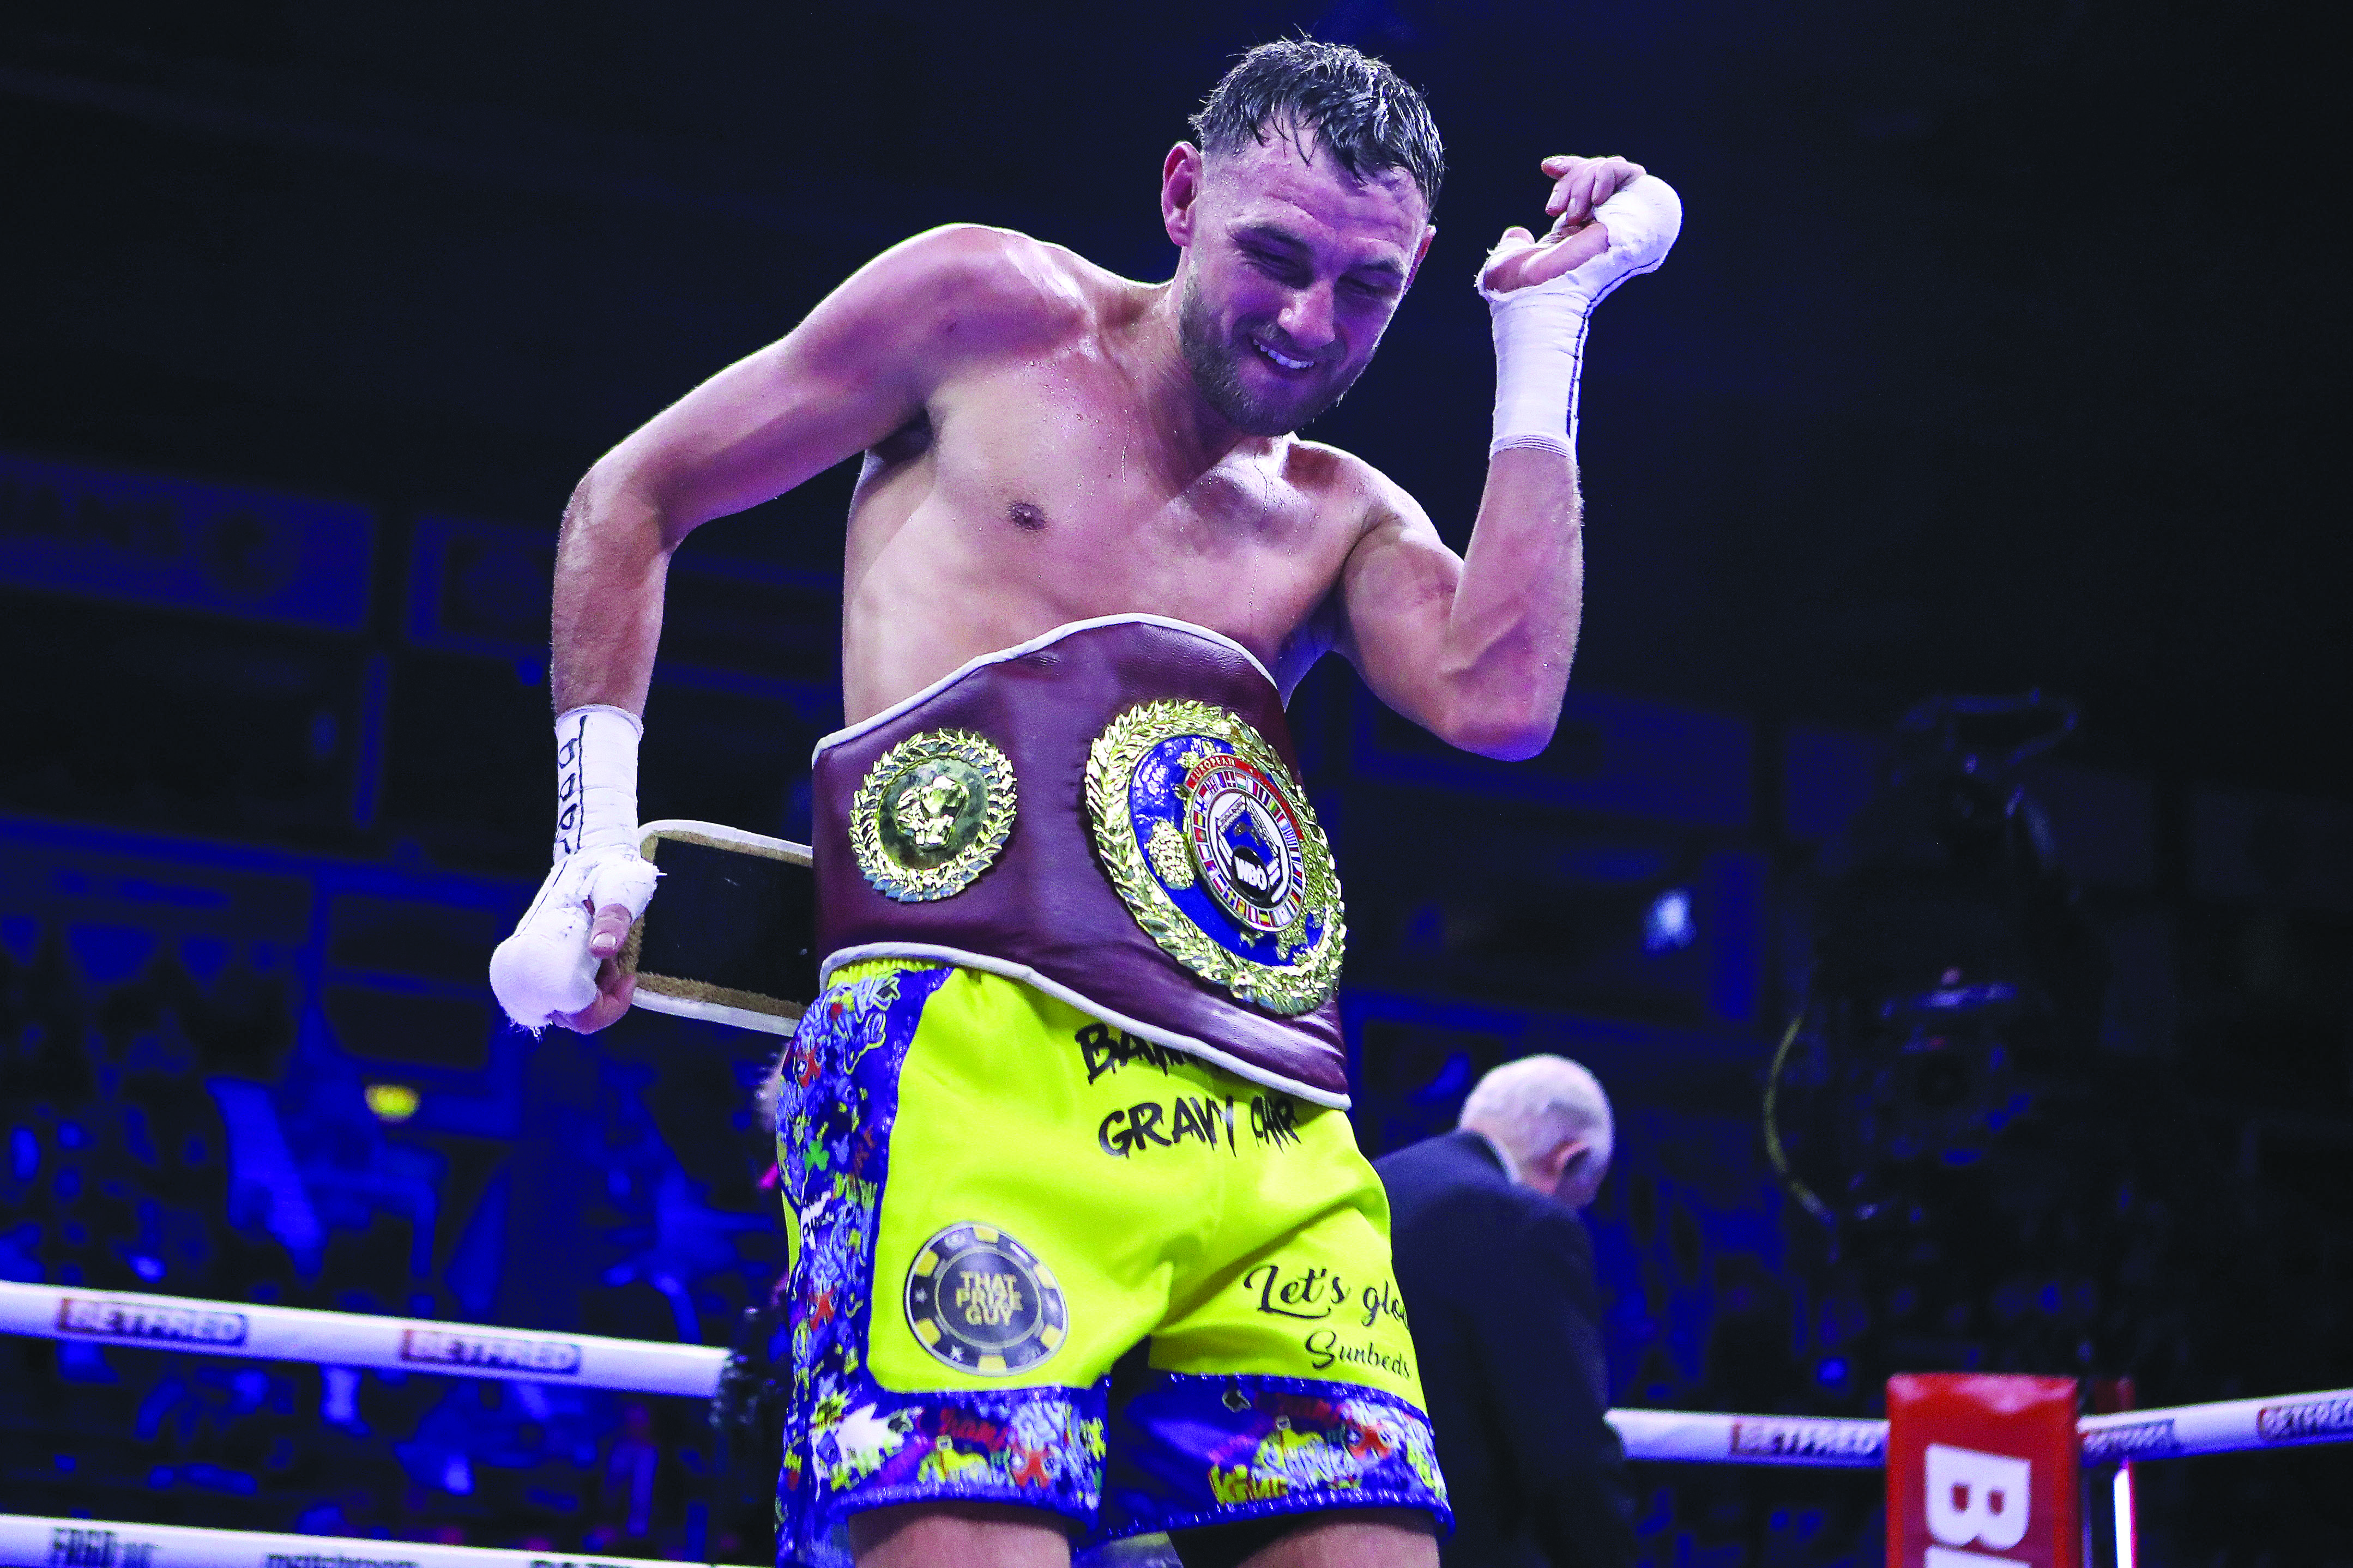 Sean McComb is confident he will be celebrating at the Barclays Centre in Brookly on Saturday night